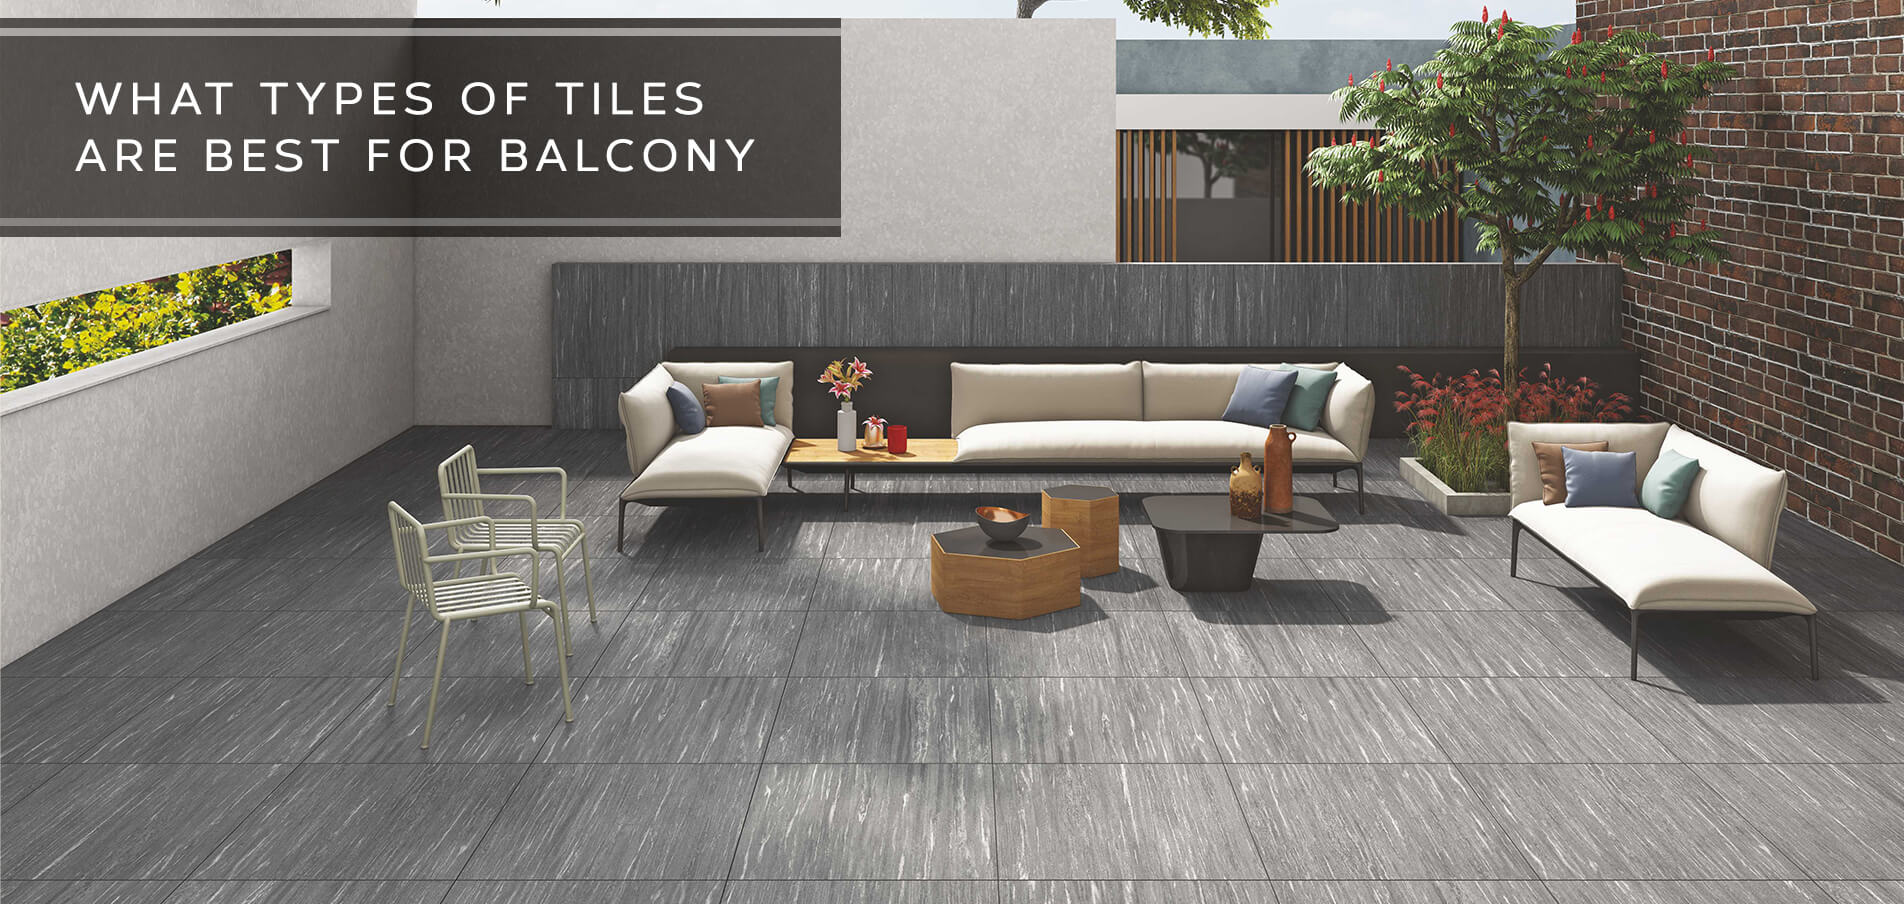 What types of tiles are best for balcony